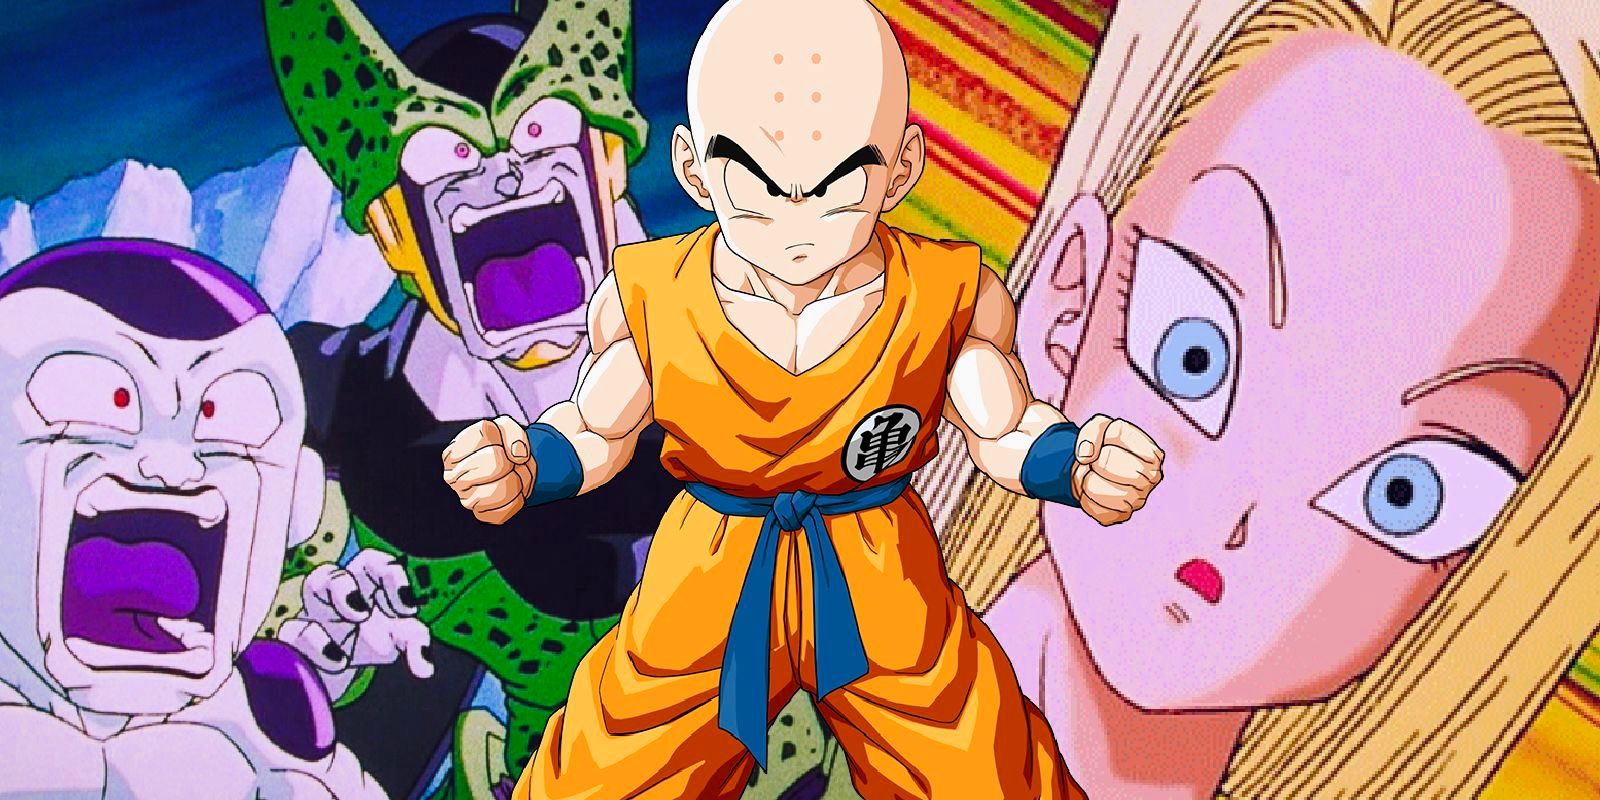 Krillin takes an intimidating pose in front of Frieza, Cell and Android 18 in Dragon Ball Z